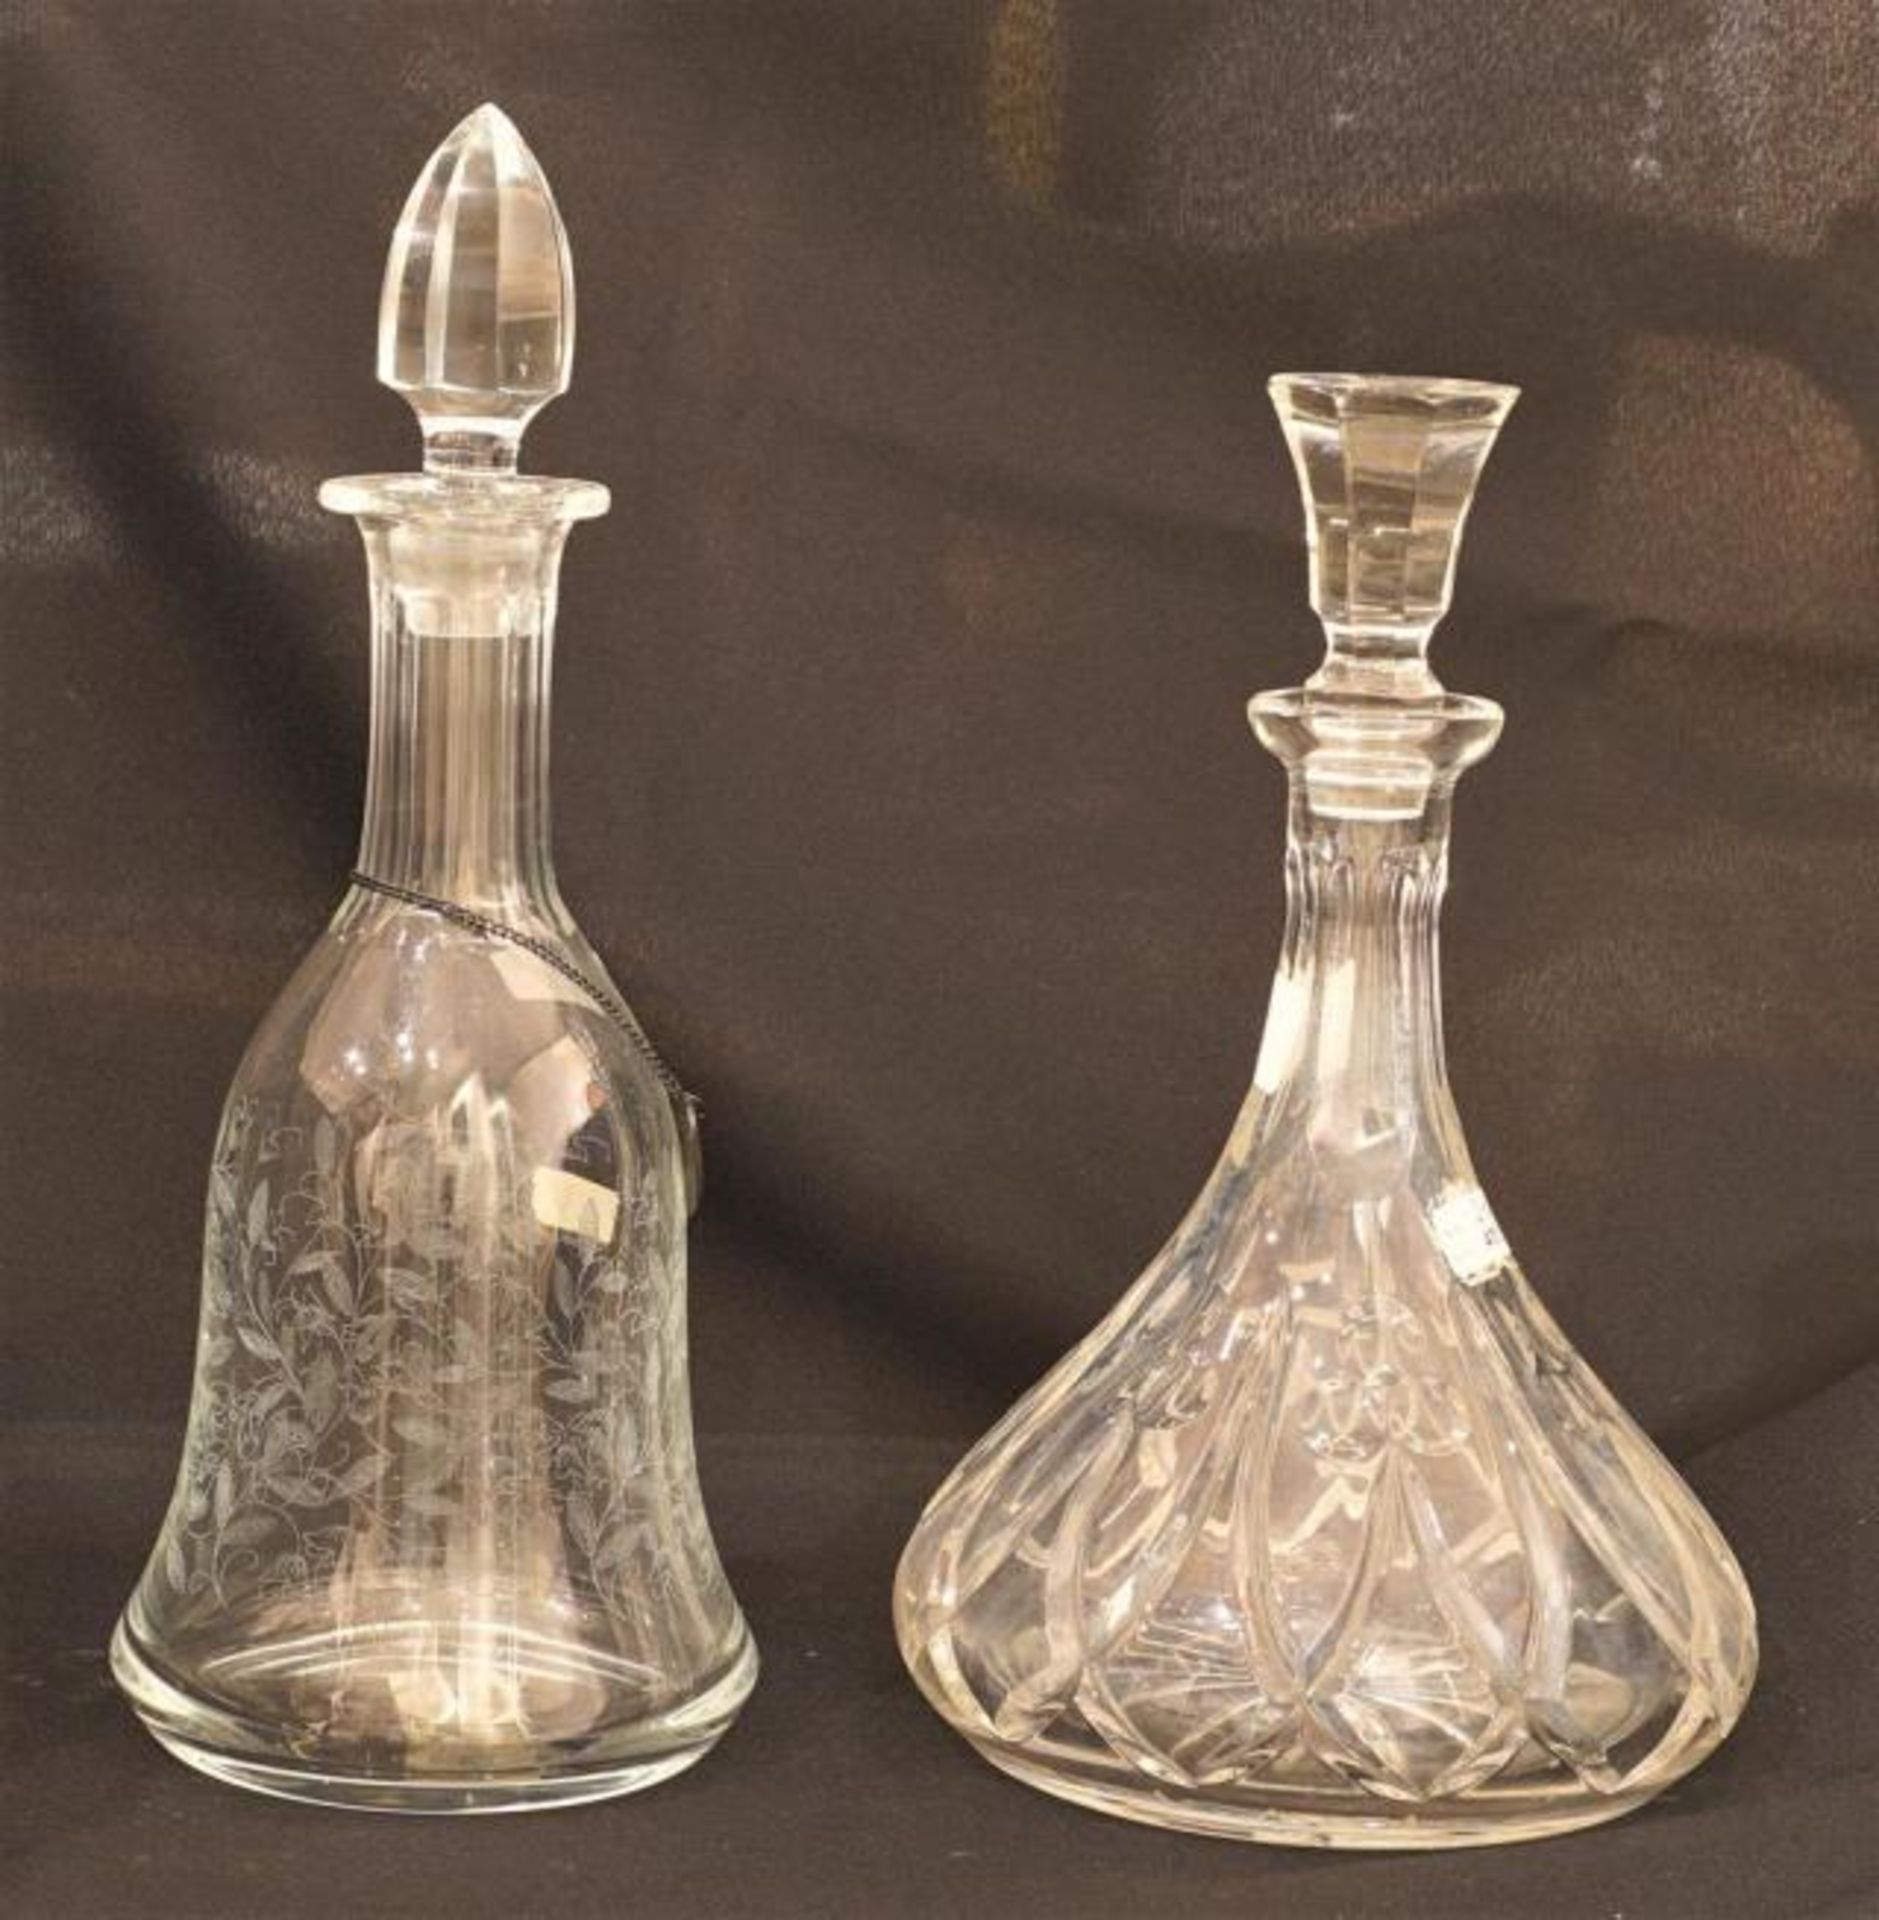 Two carafes, glass and crystal, h. 28 and 32 cm (2x)